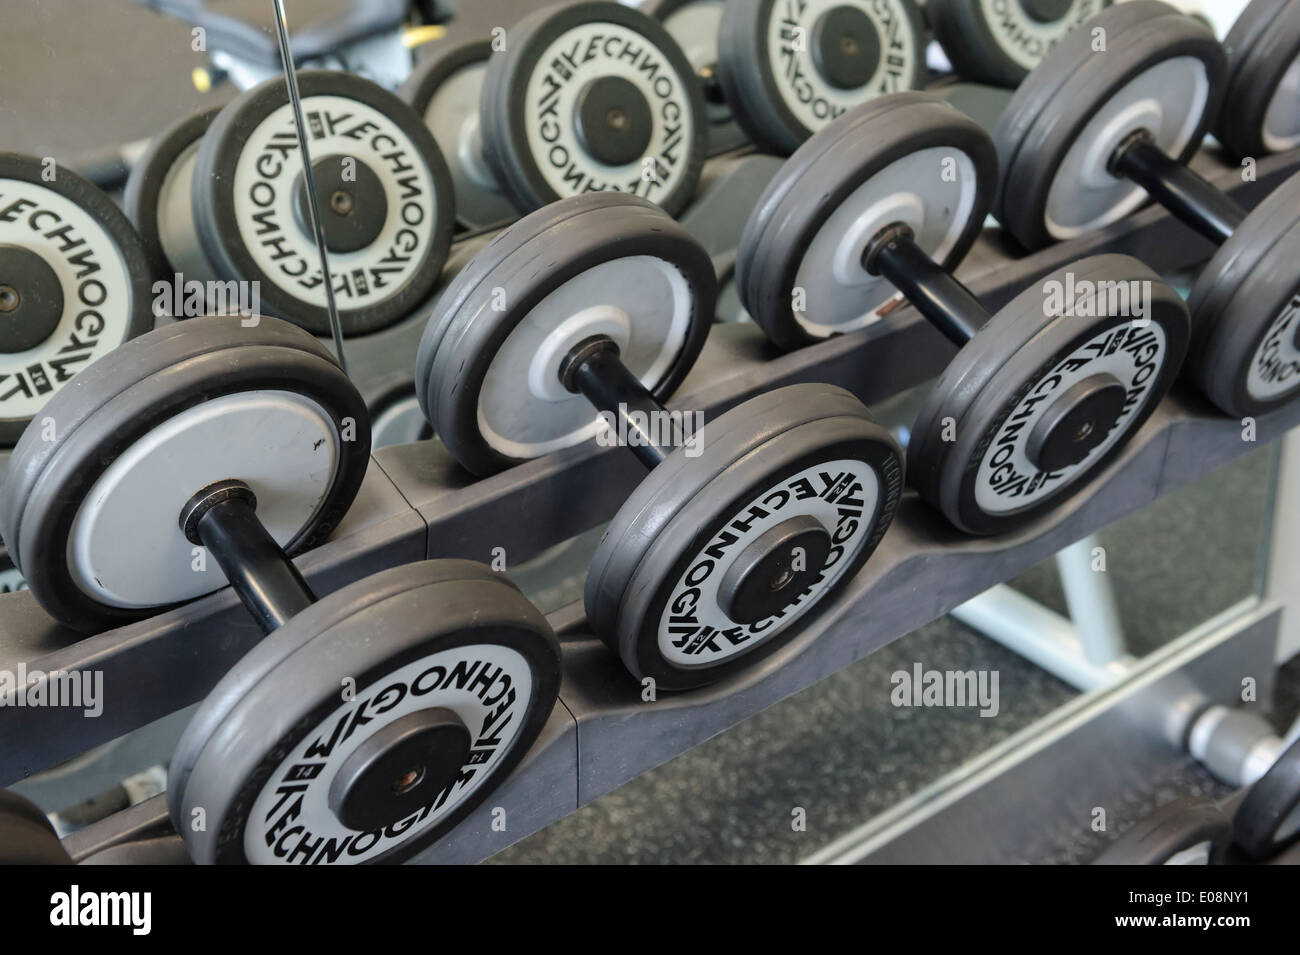 Rack of dumbbells at gym Stock Photo